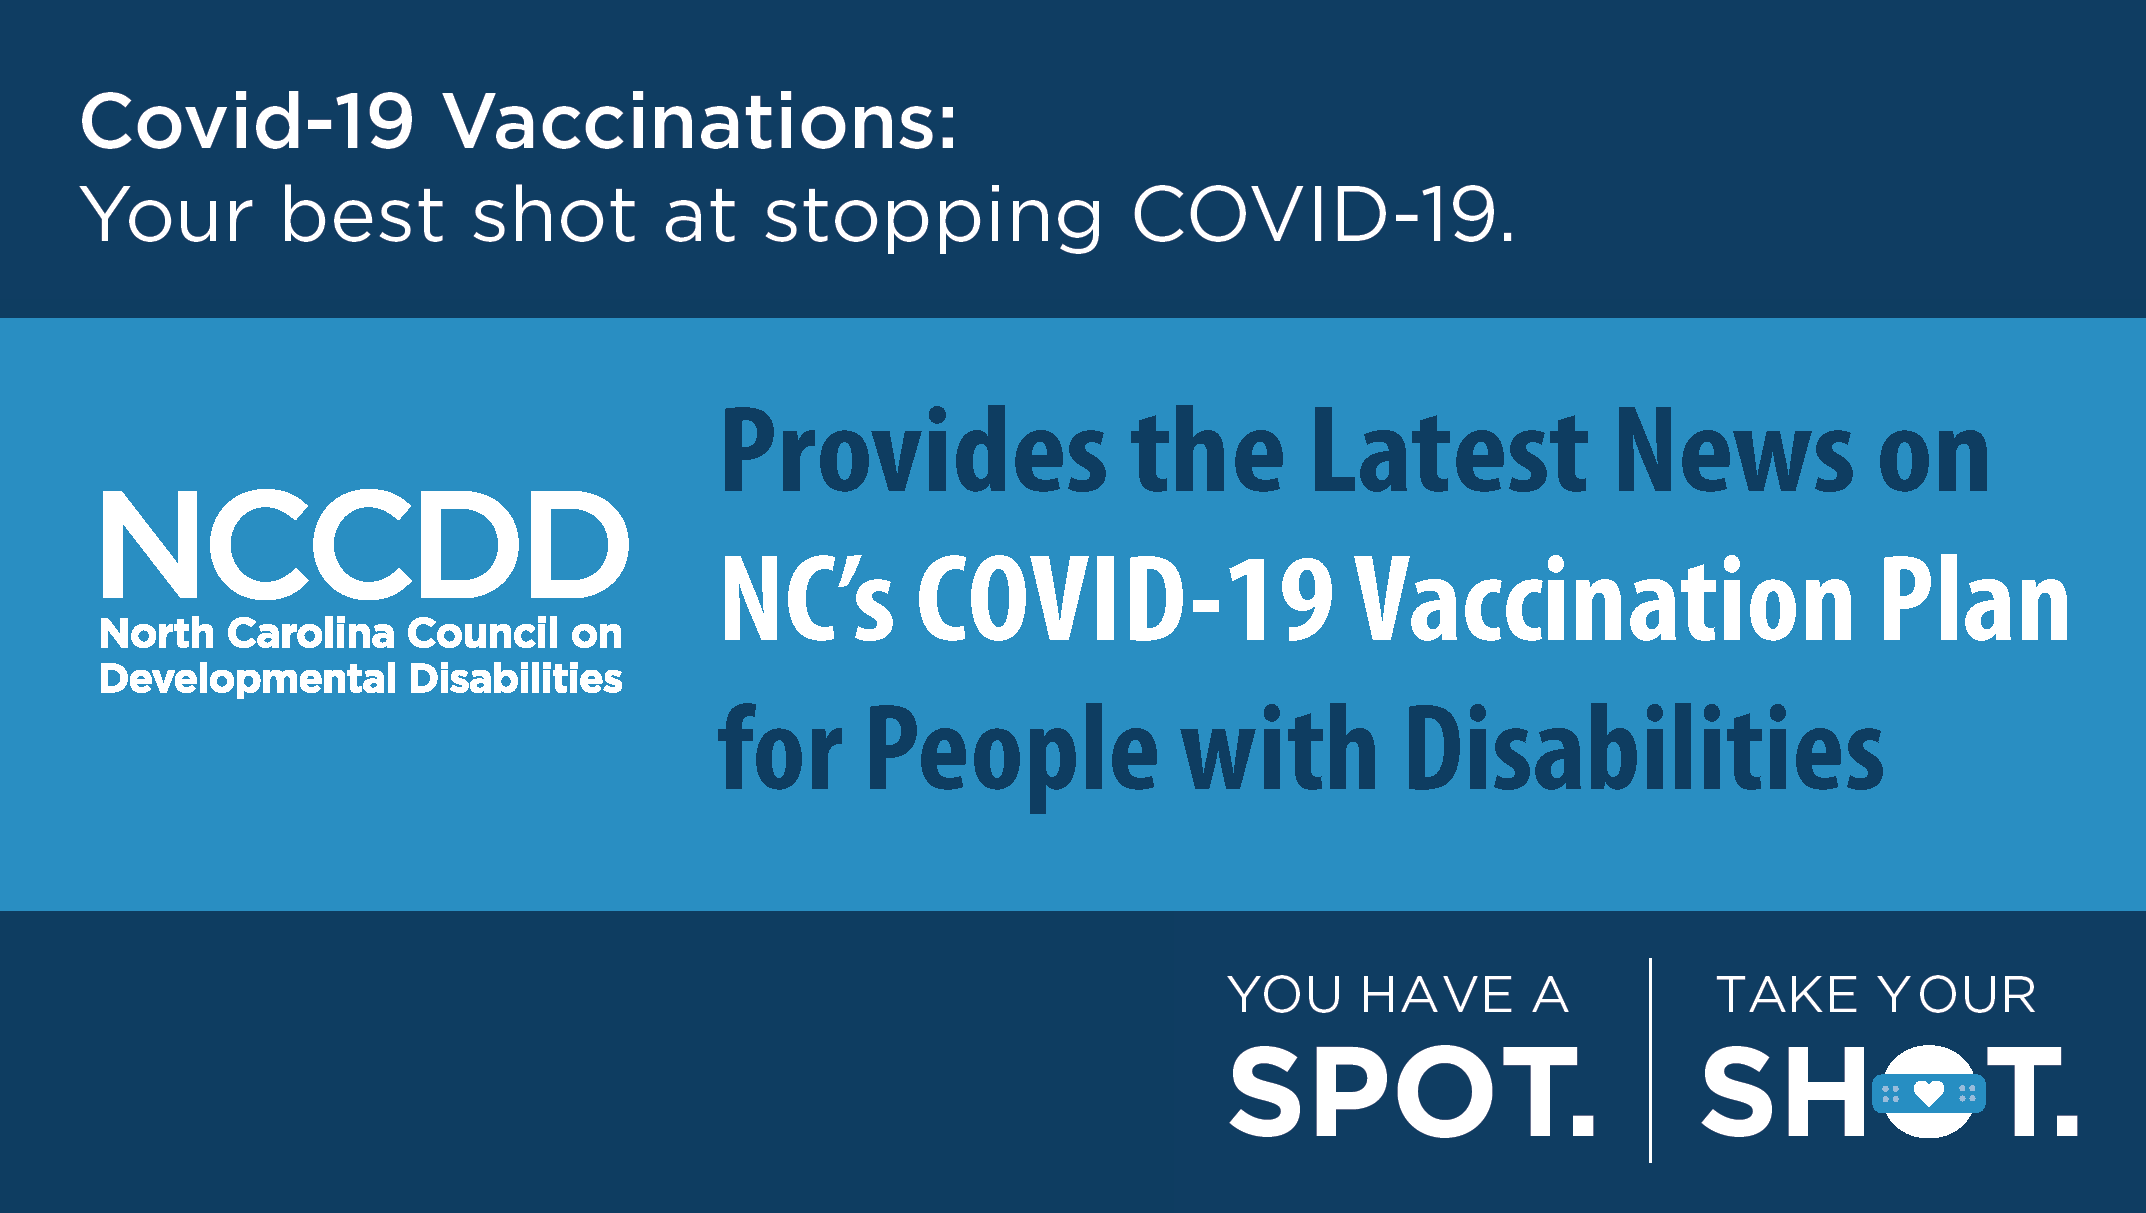 COVID-19 Vaccinations: Your best shot at stopping COVID-19. NCCDD provides the latest news on NC's COVID-19 Vaccination Plan for people with disabilities.